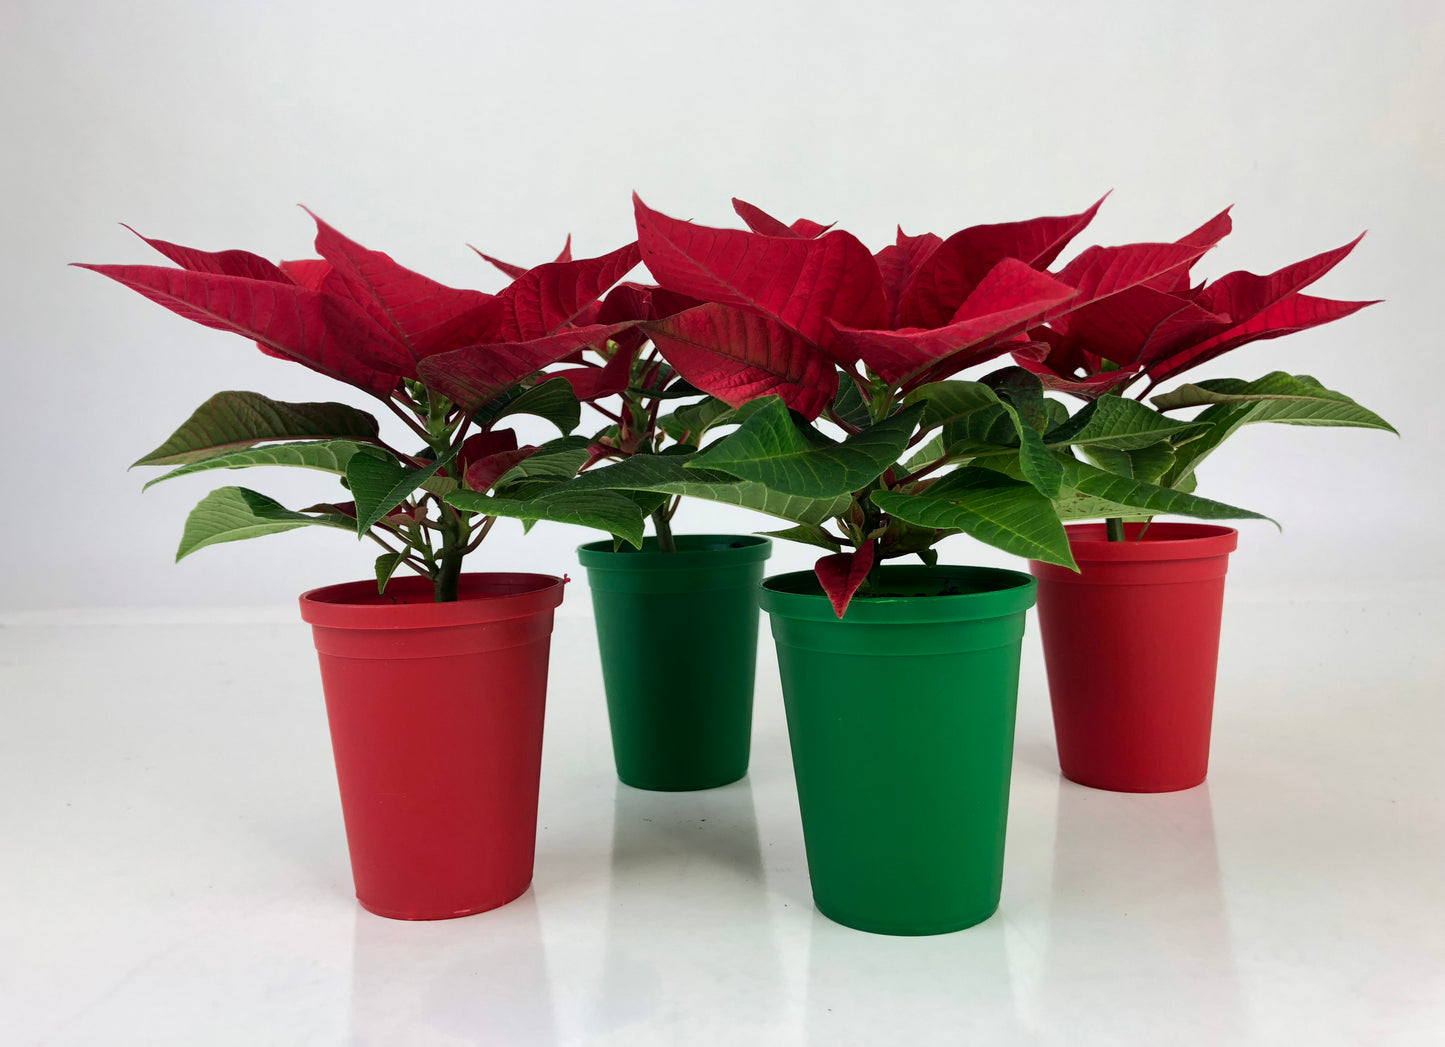 2" Mini Poinsettia Gift Set (4 Plants) with Red/Green EcoPlastic Pots